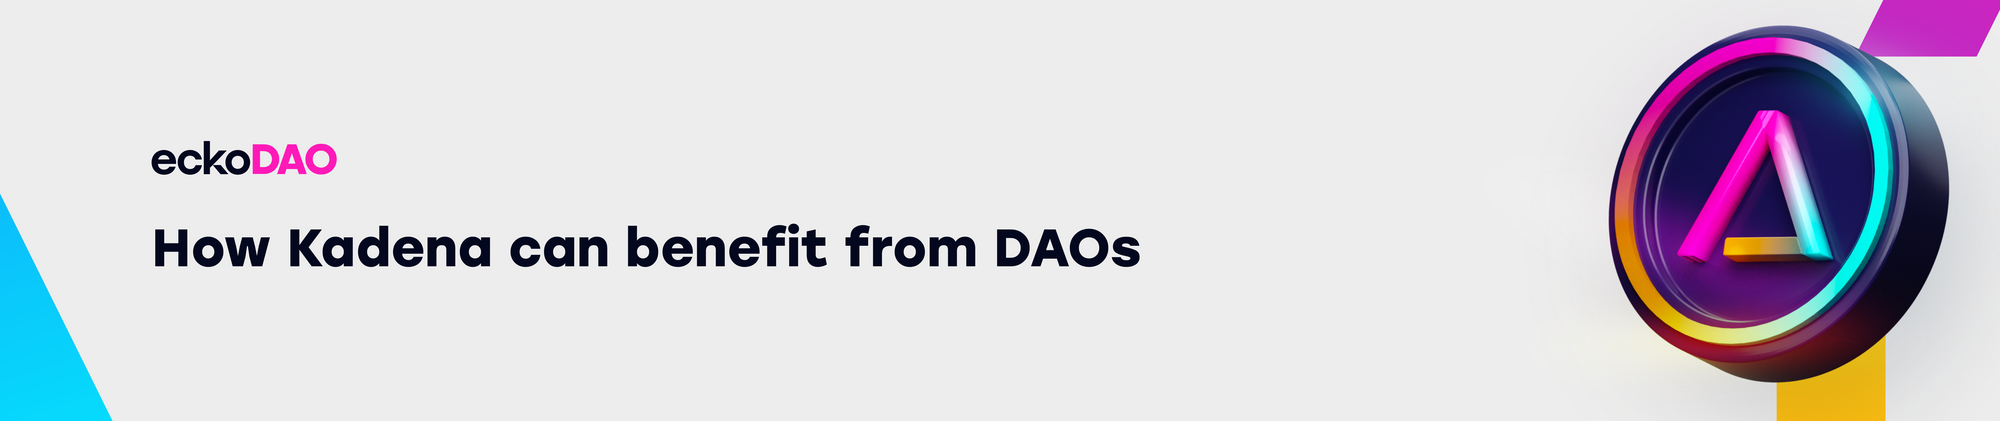 How Kadena can benefit from DAOs